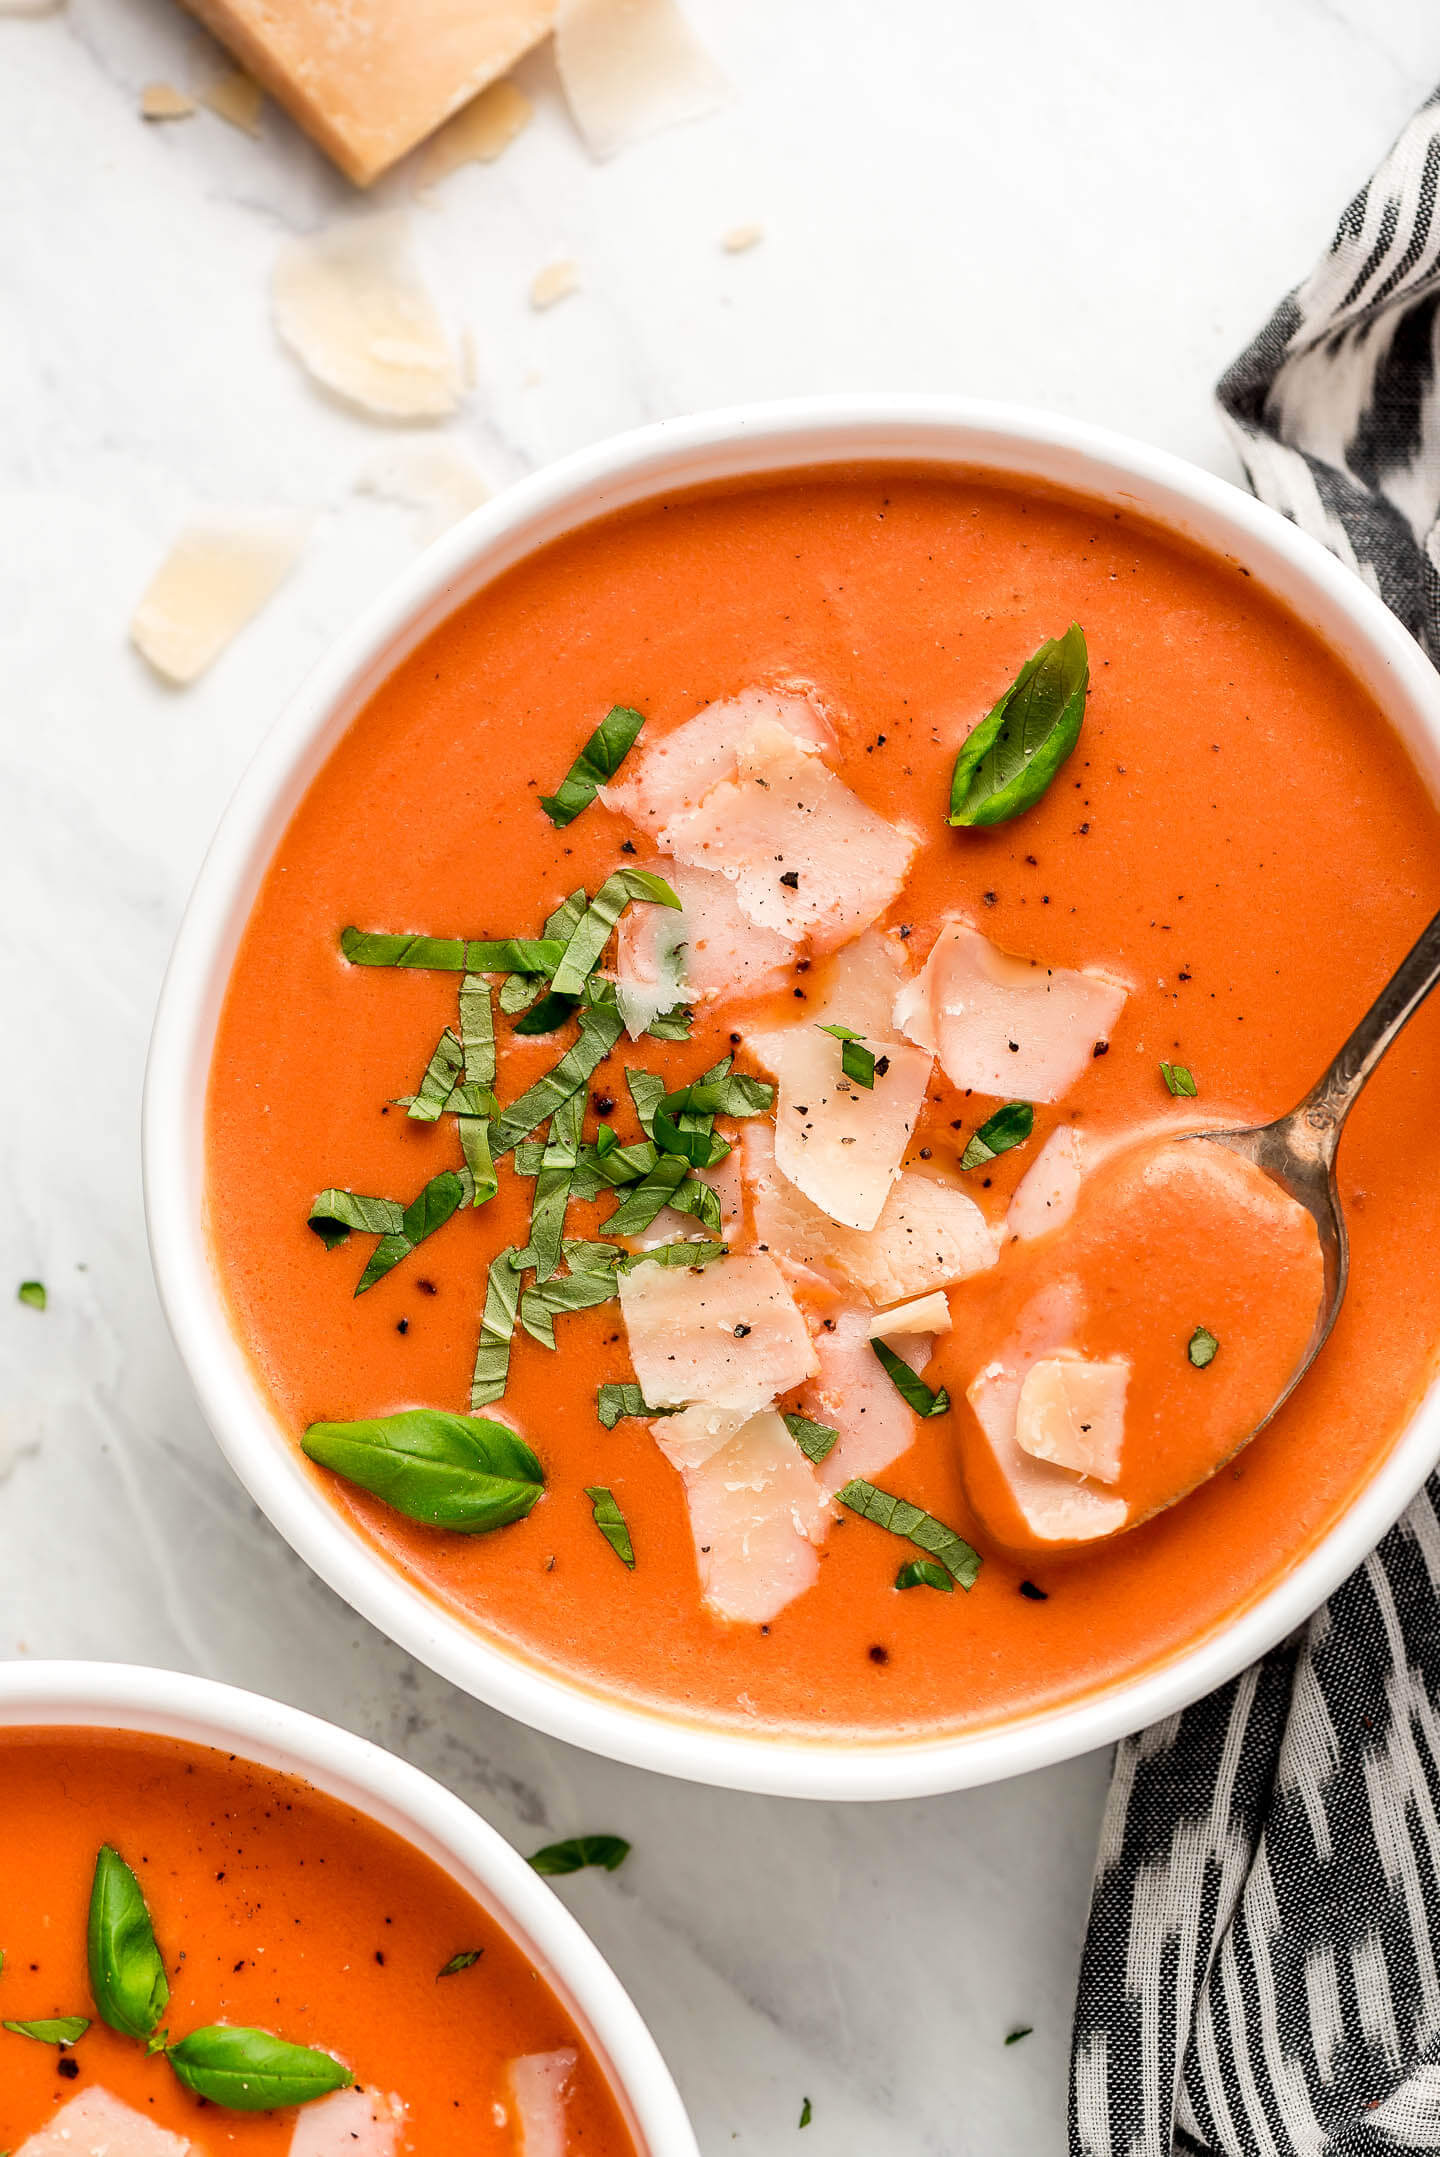 Creamy Tomato Basil Soup garnished with shaved parmesan, black pepper, and ribbons of basil.